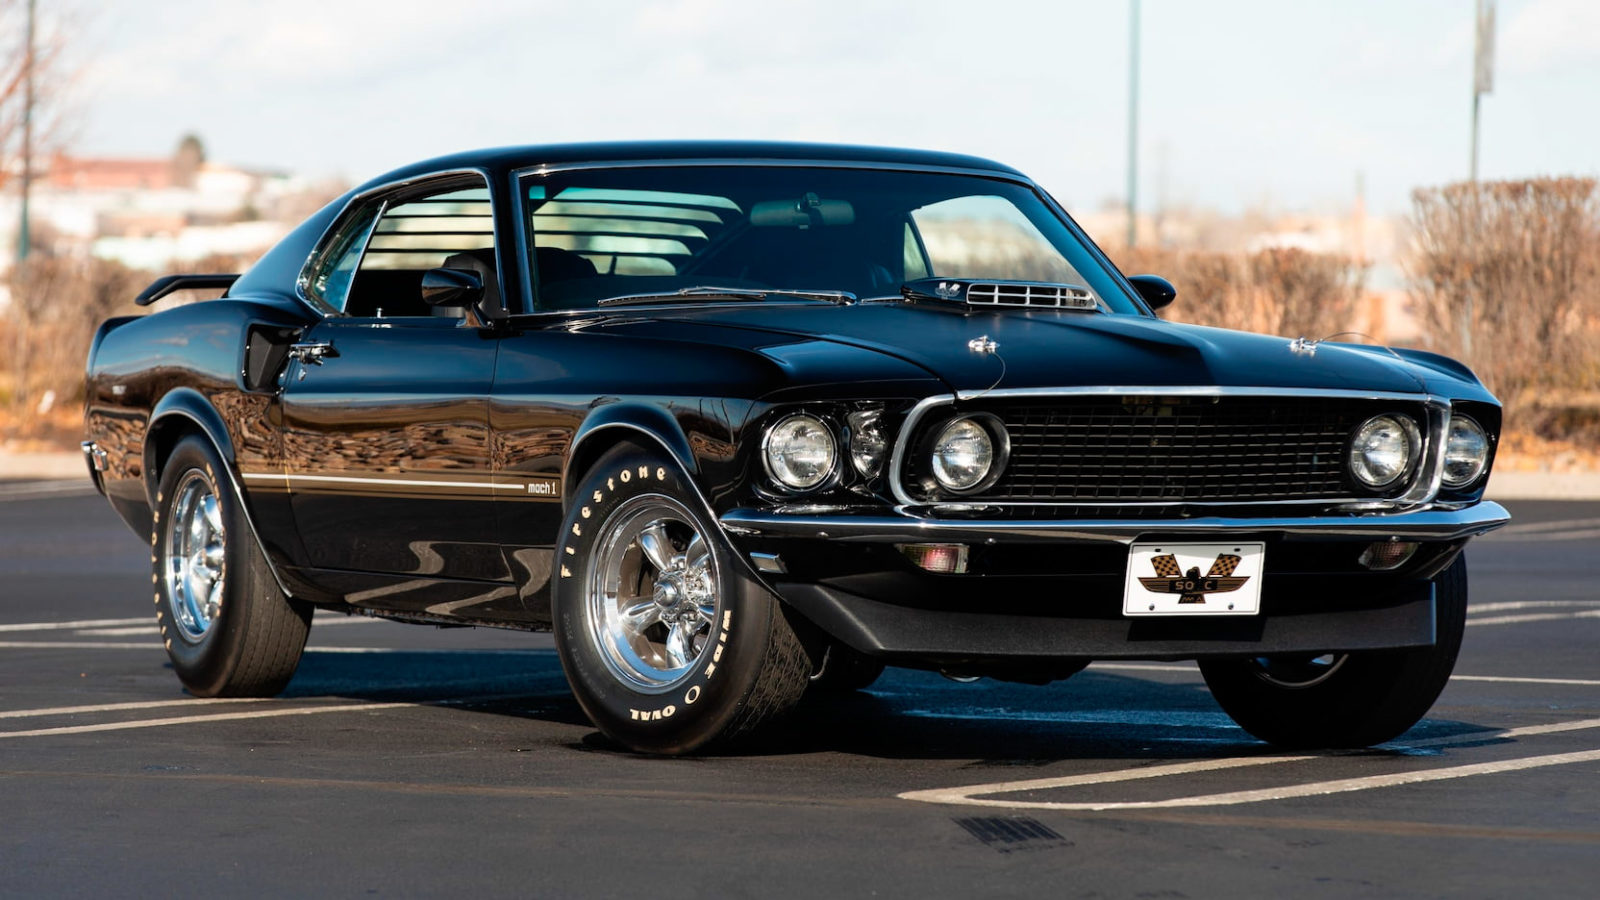 A Cammer-Powered 616 HP Ford Mustang Mach 1 – “The Sin City Shaker”